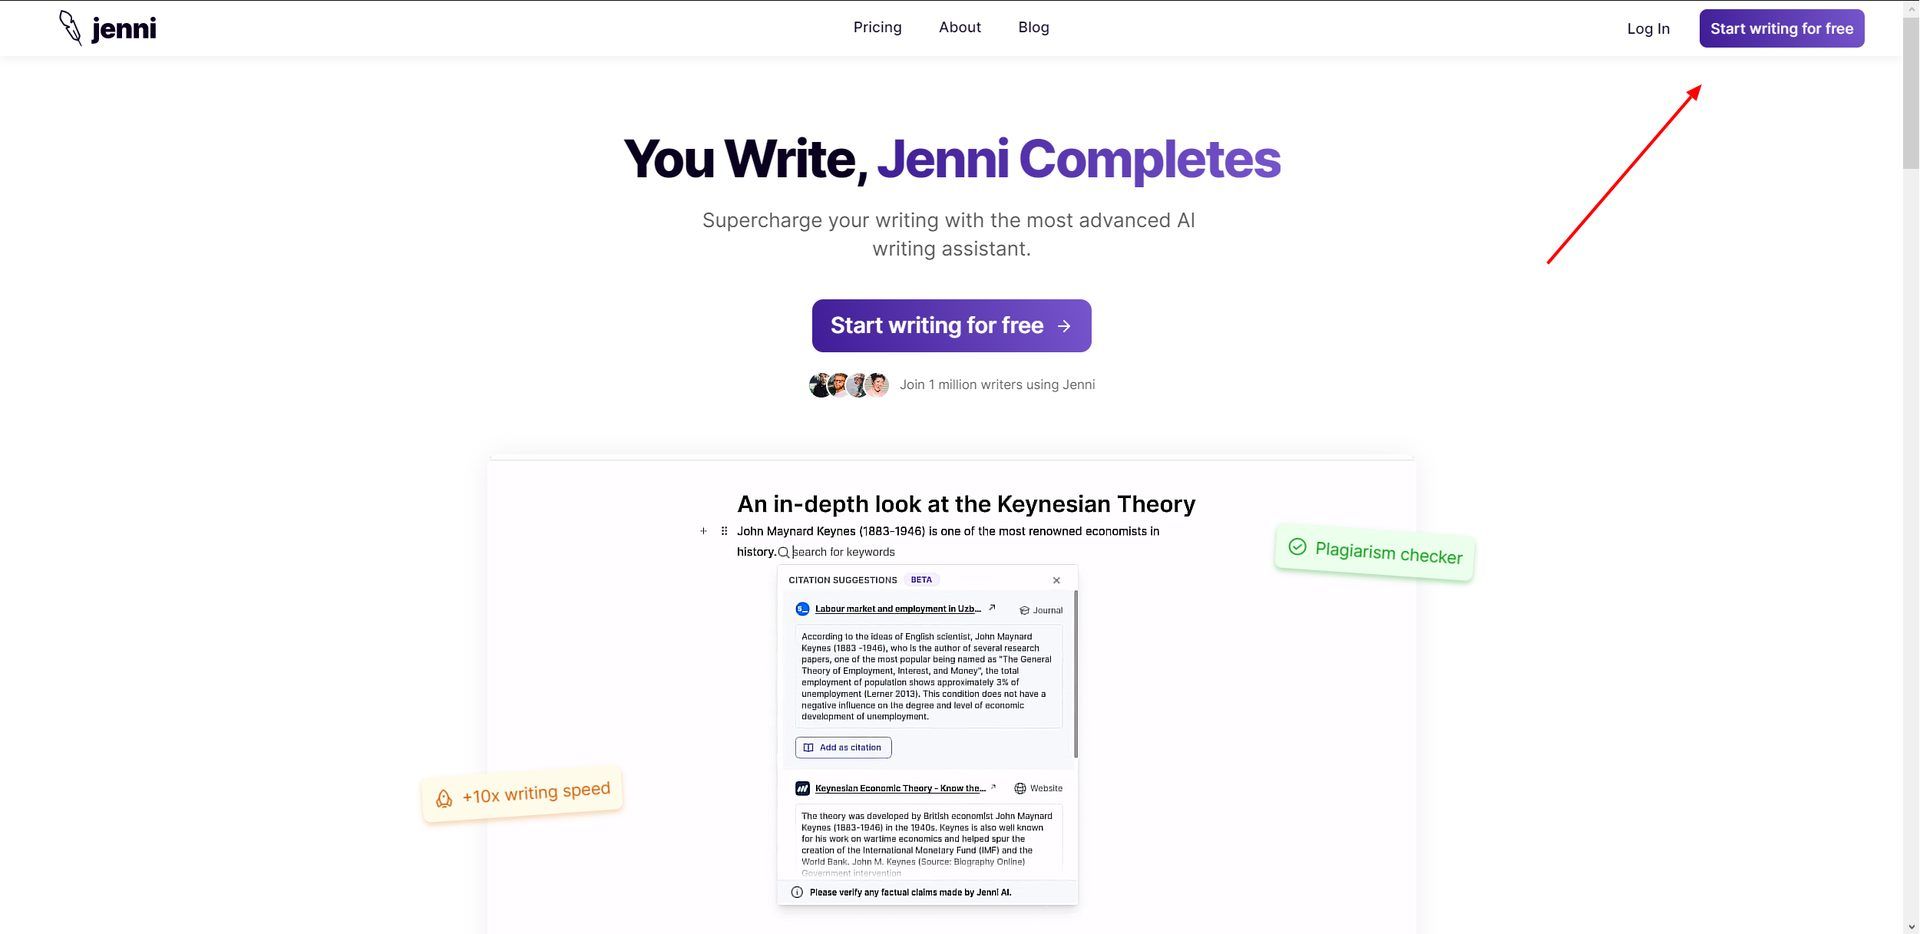 What is Jenni AI? Learn how it works with examples and discover free Jenni AI alternatives if you don't want to pay! Continue reading...